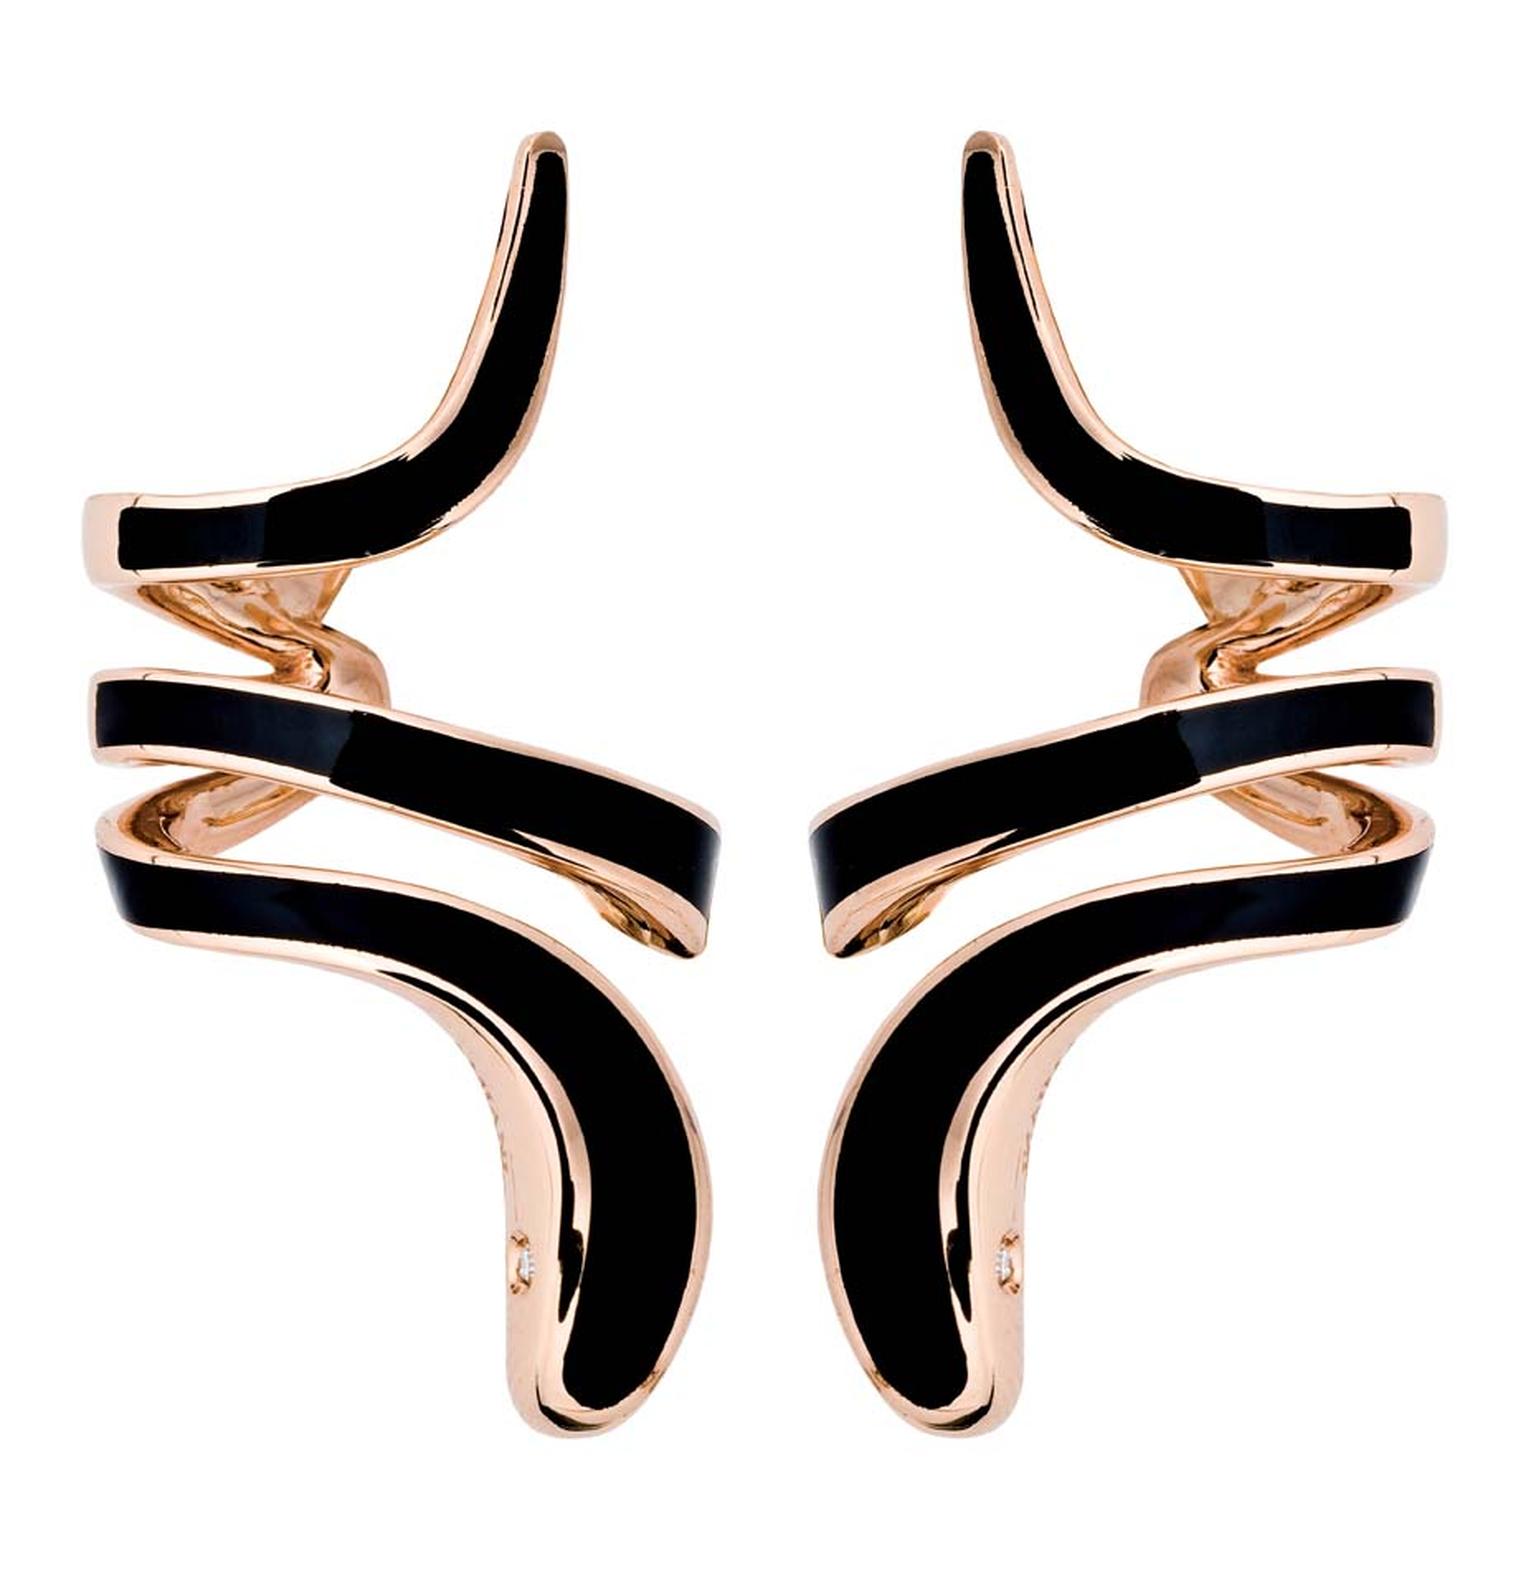 Pink gold and black ceramic earrings from Damiani's Eden collection.